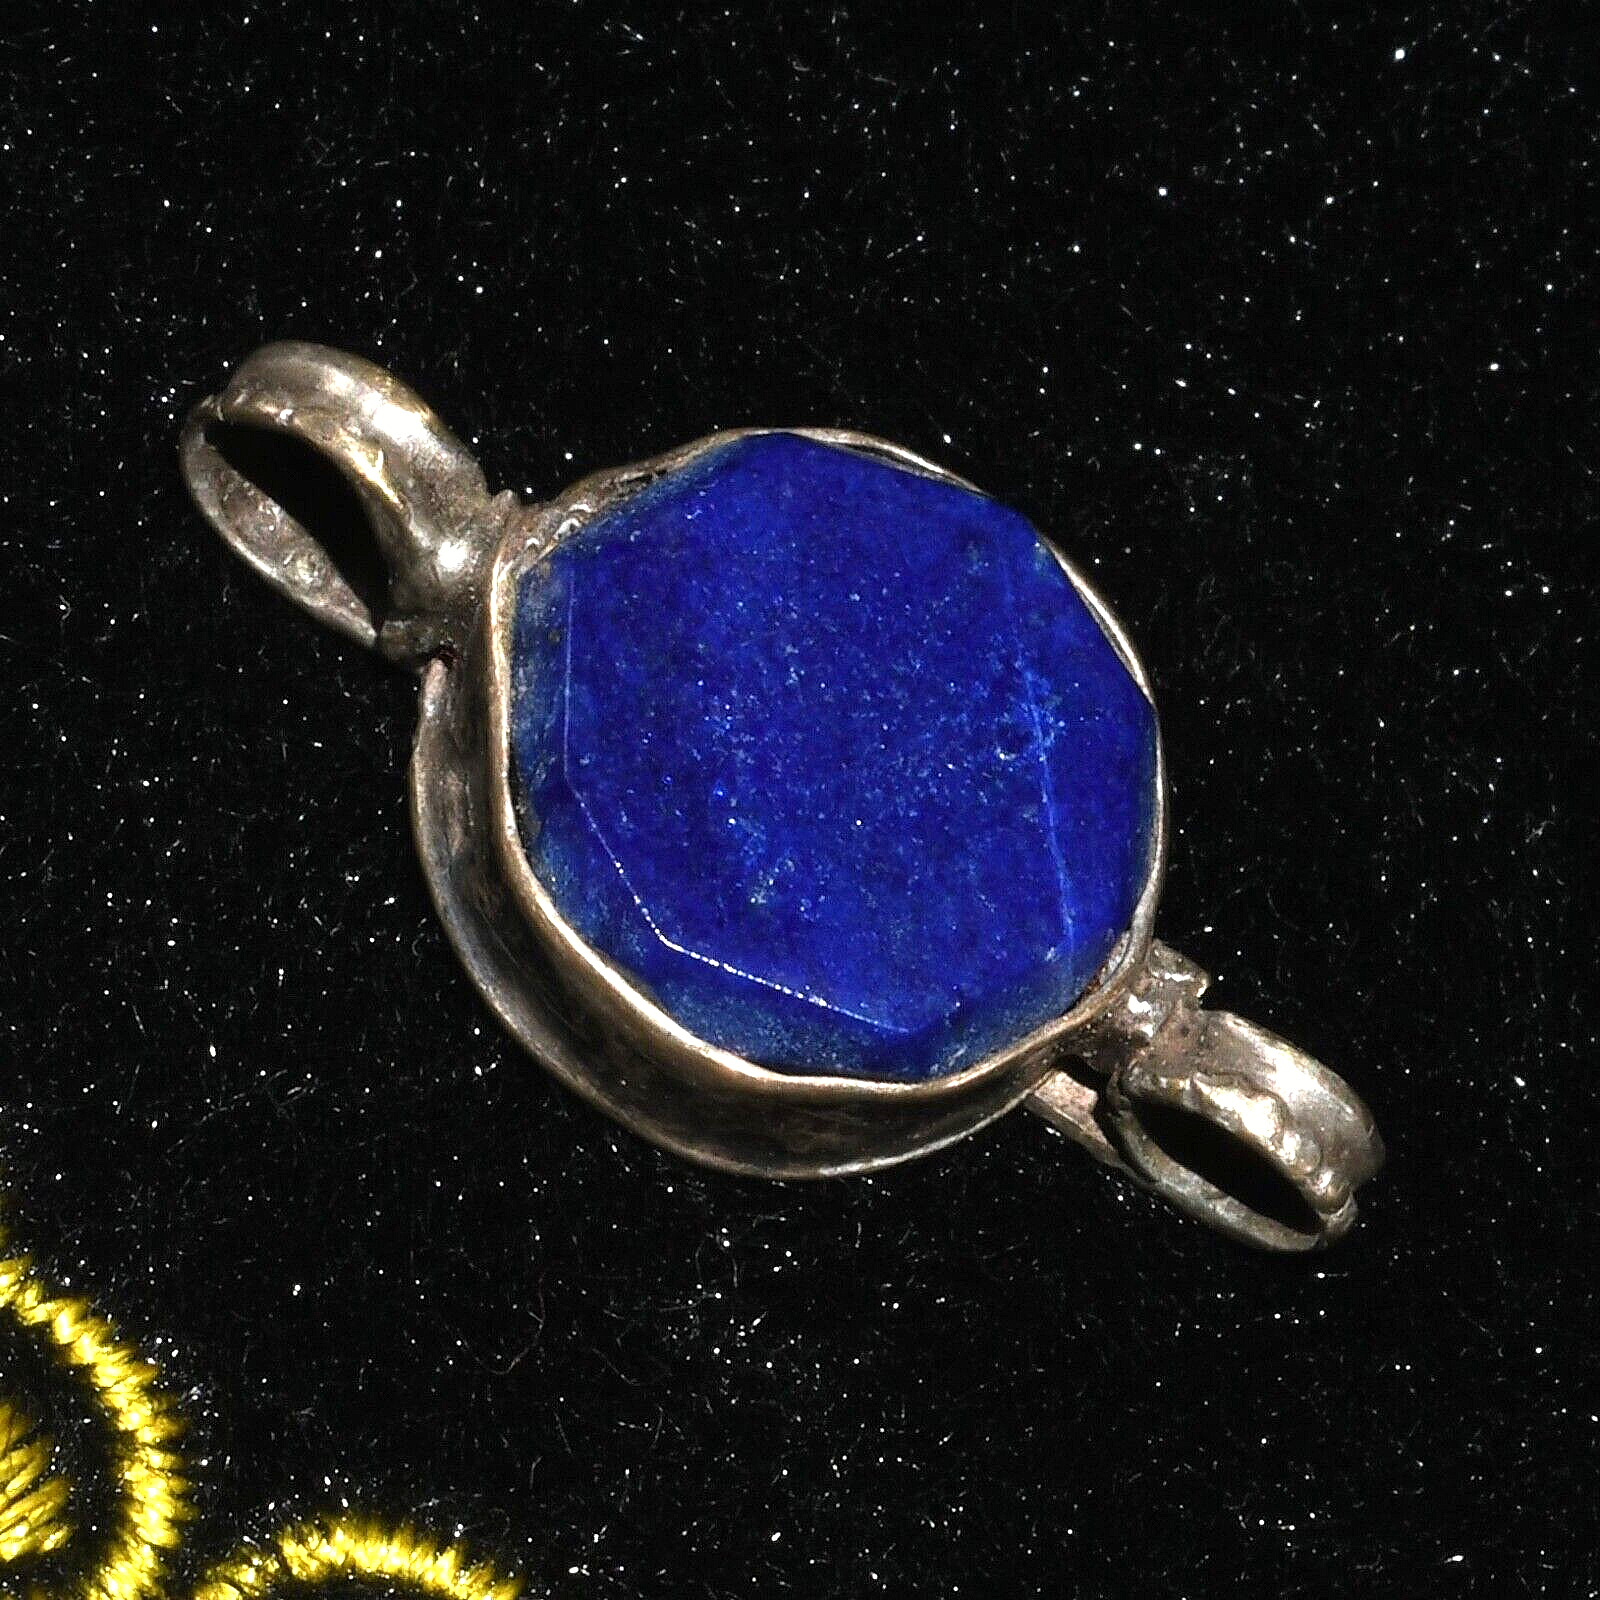 Large Ancient Old Near Eastern Silver Bead Ornament with Lapis Lazuli Inlay